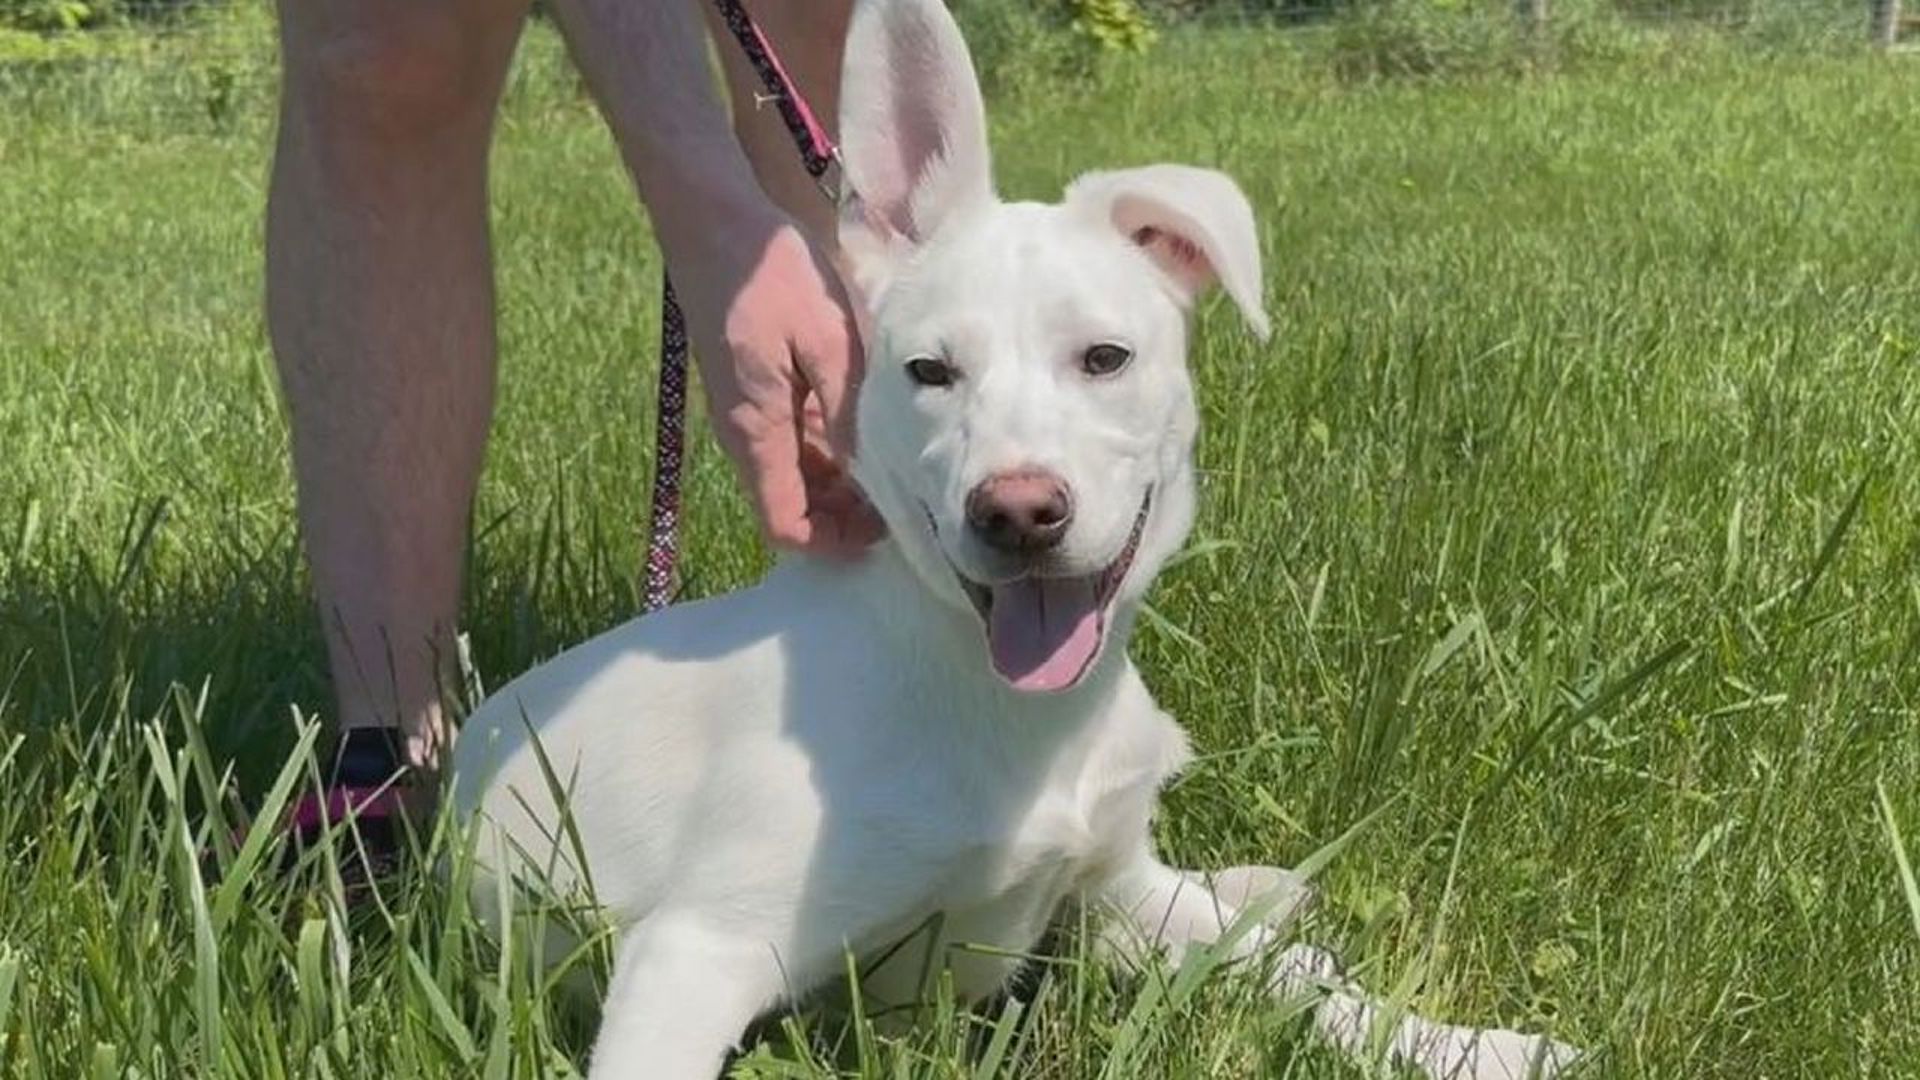 Dakota is a husky and Australian shepherd mix puppy with big ears and an even bigger personality. She's available for adoption at Charlie's Crusaders Pet Rescue.